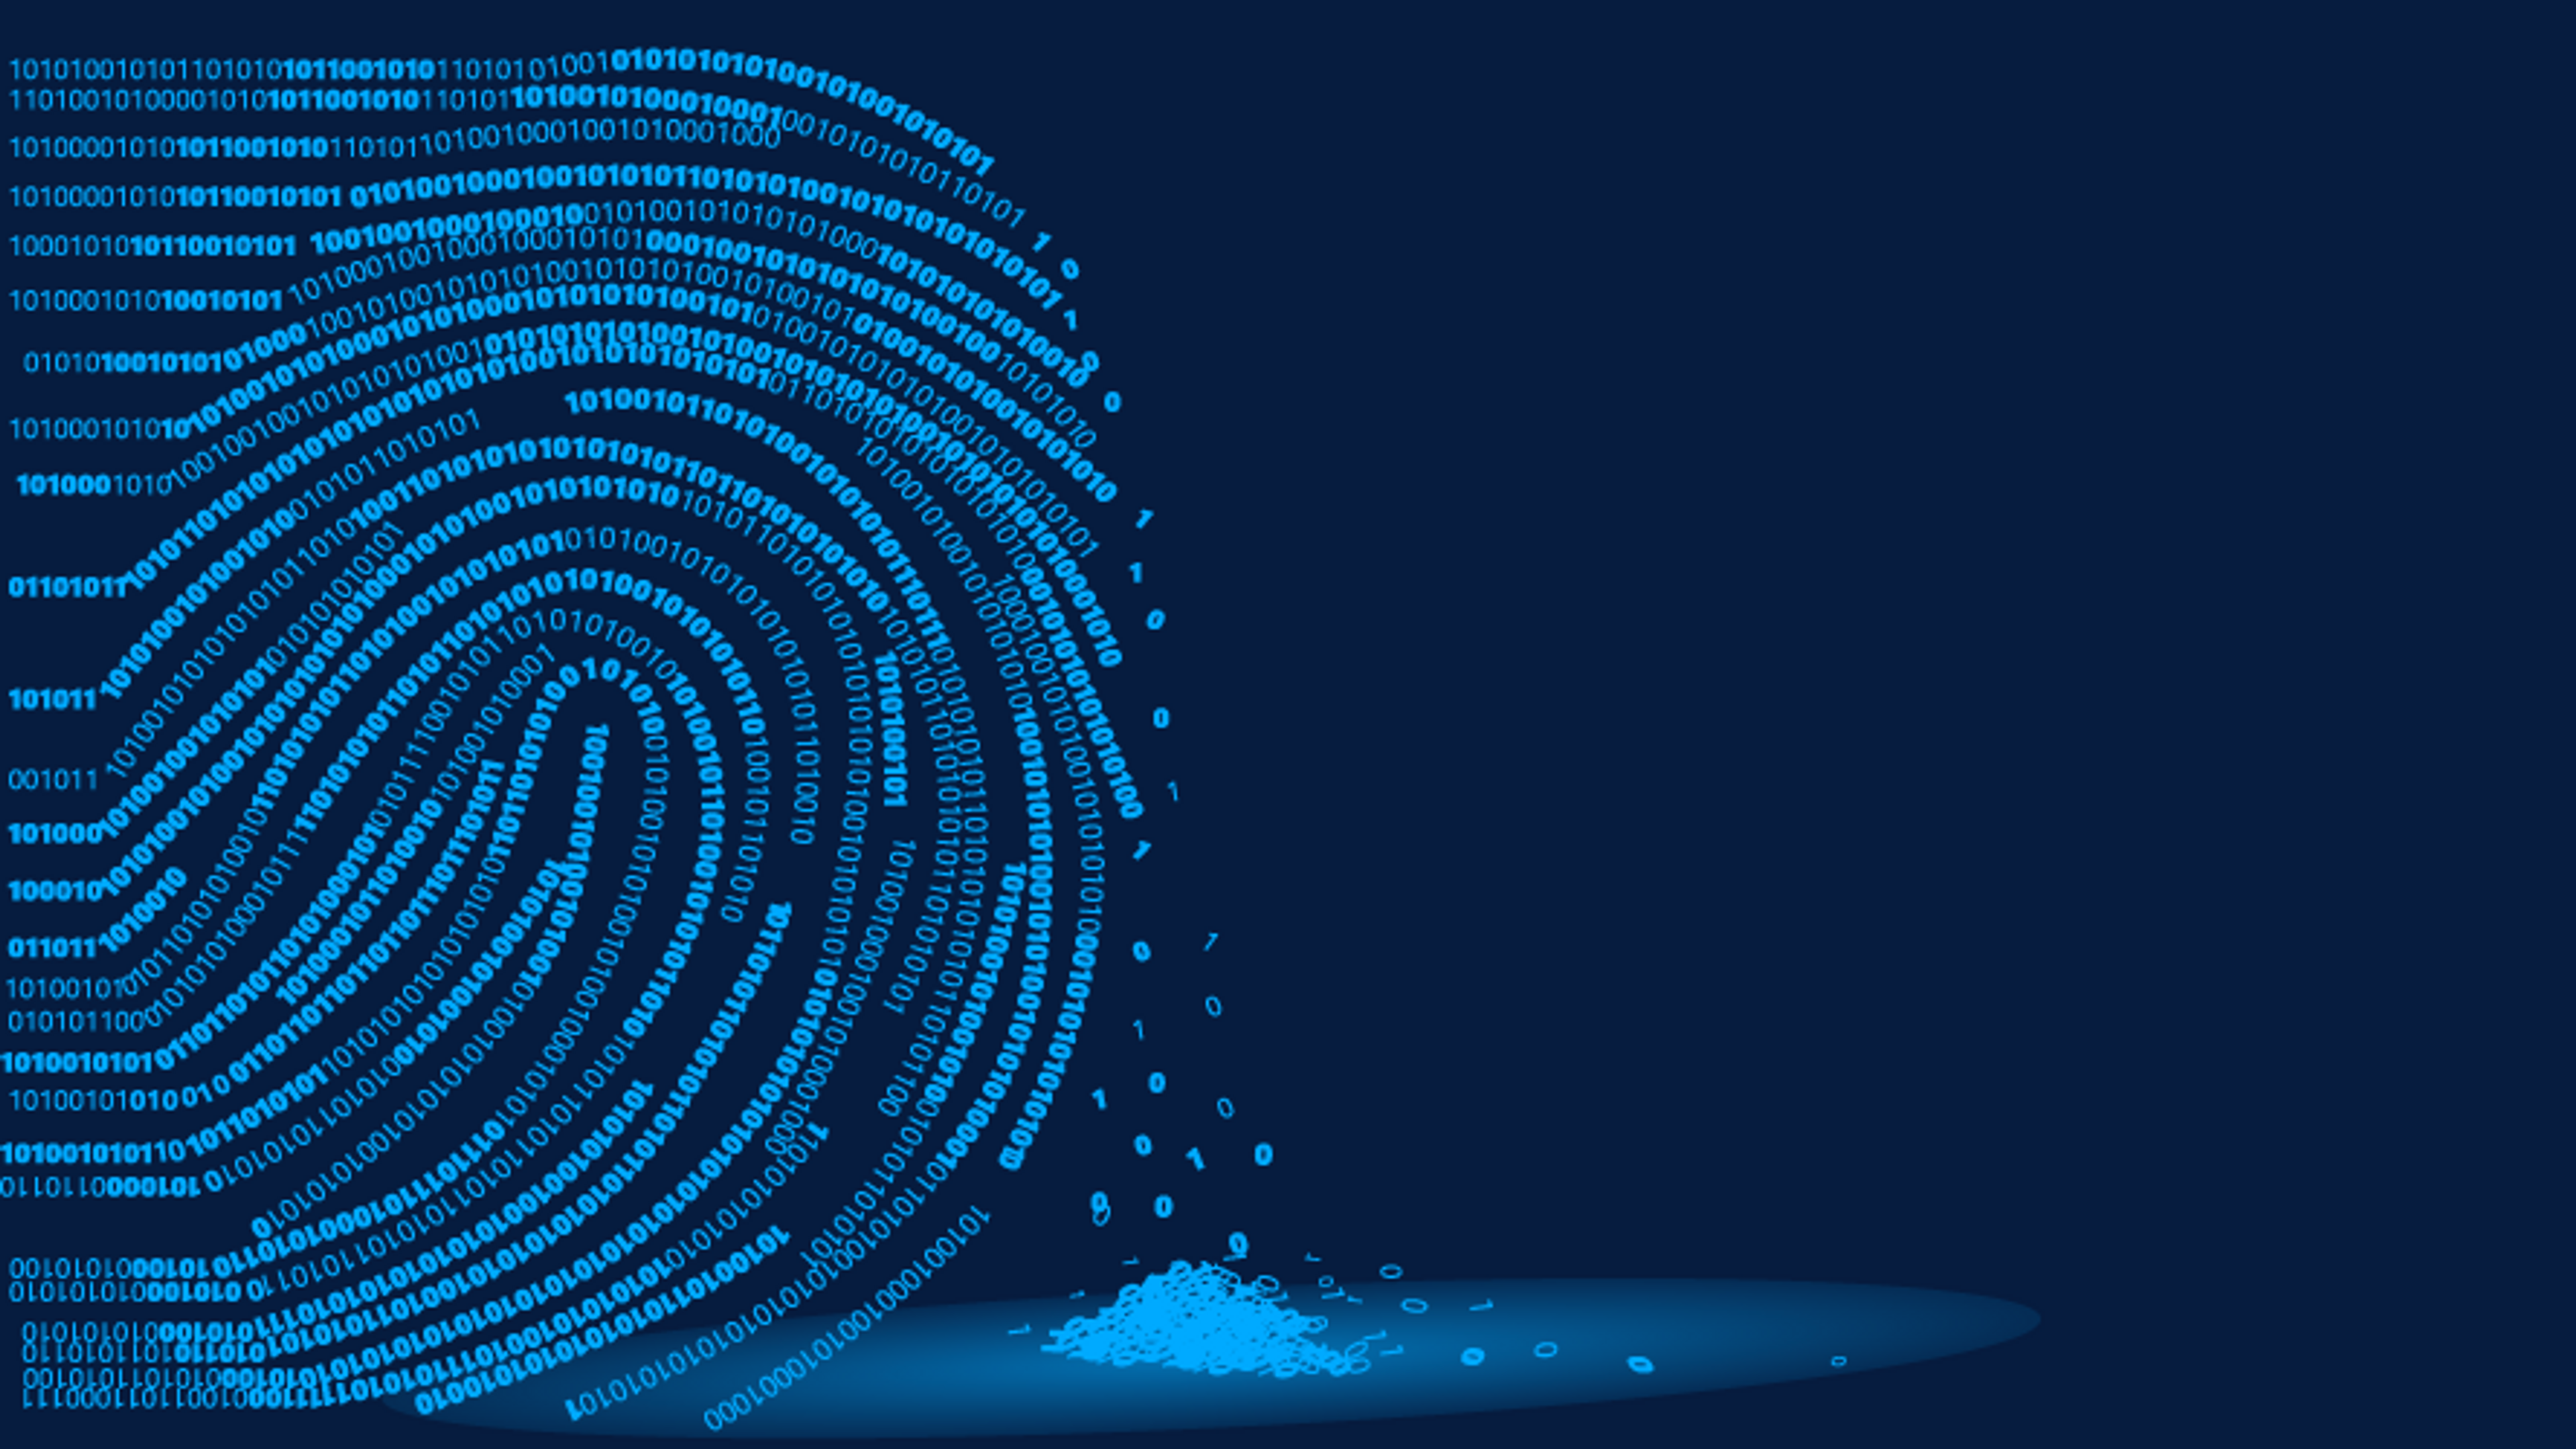 Illustration of a digital fingerprint made up of ones and zeros, slowly disintegrating into a pile of data.